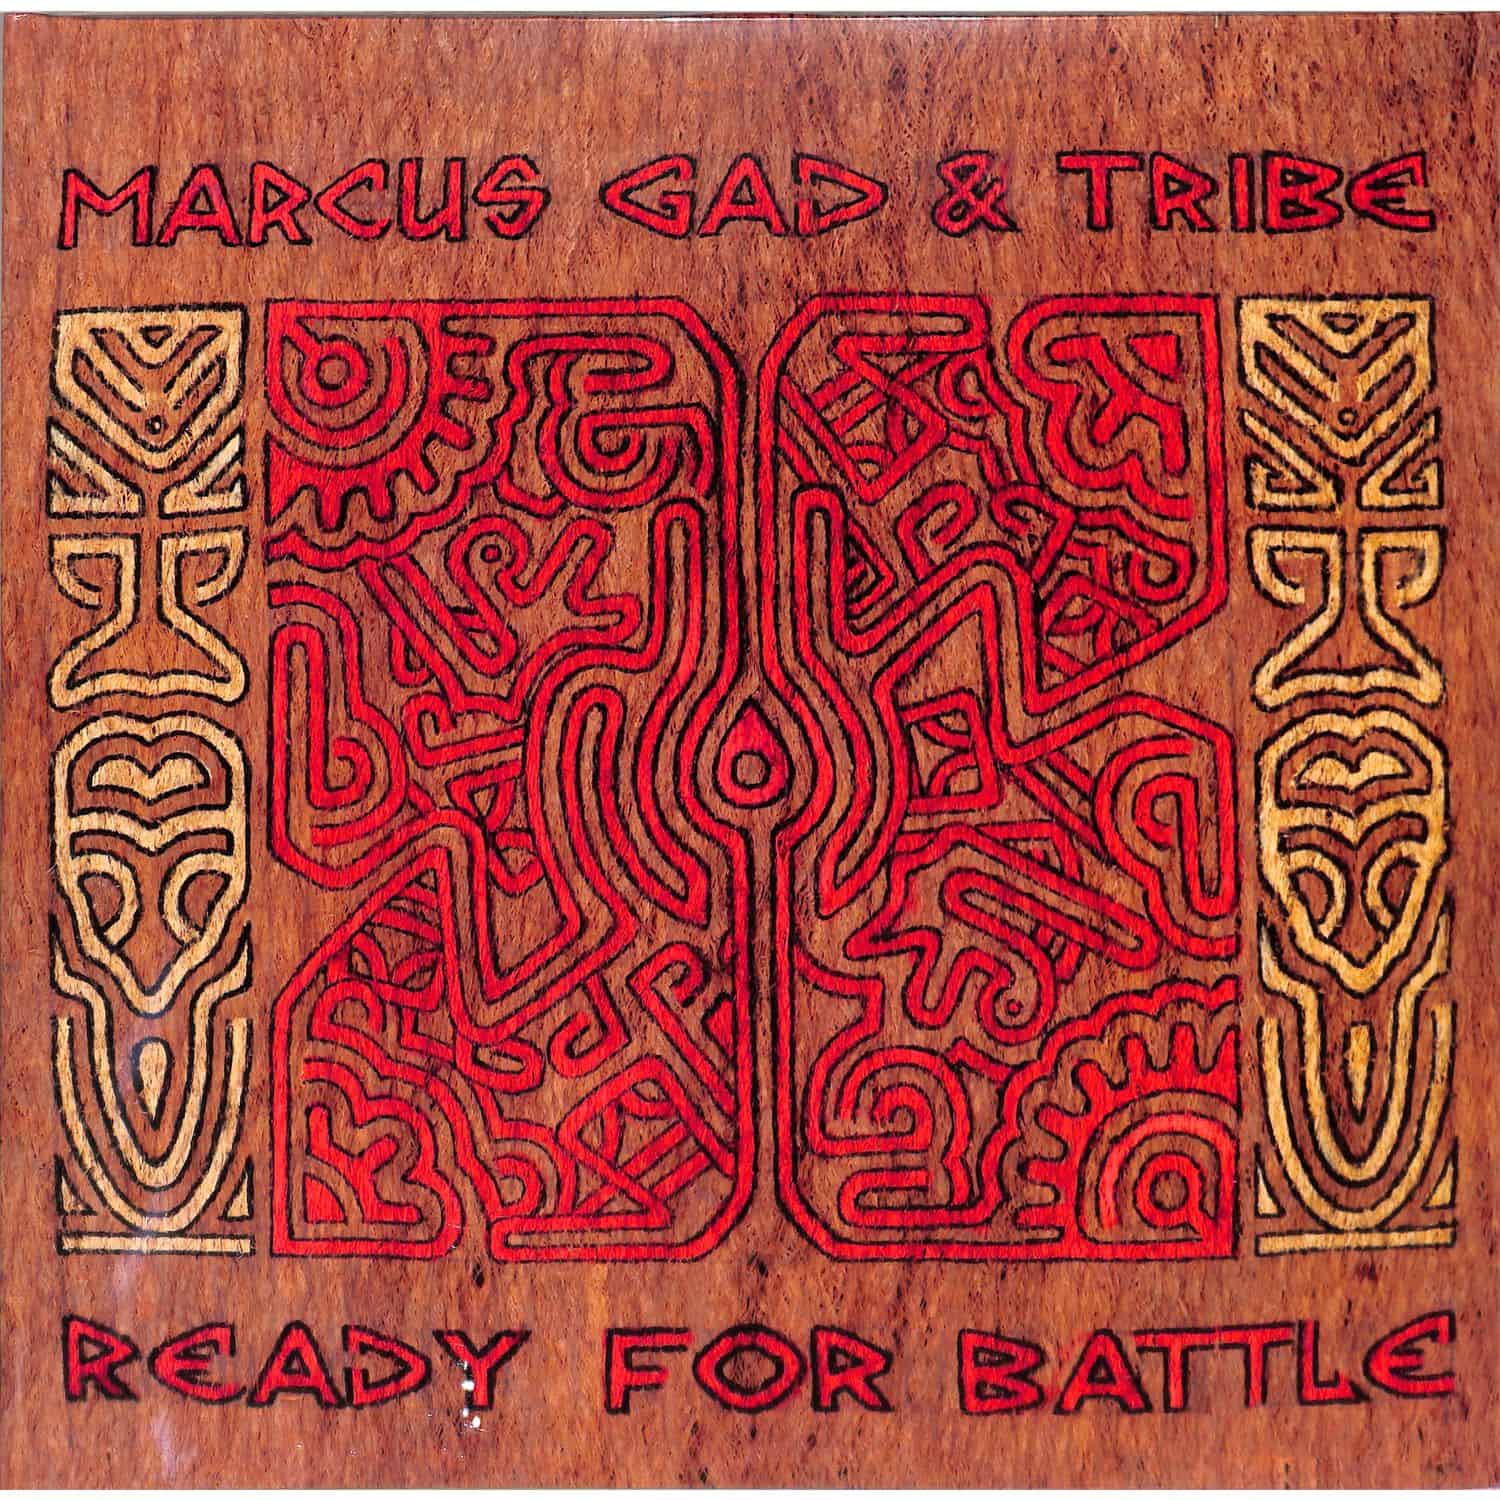 Marcus Gad & Tribe - READY FOR BATTLE 